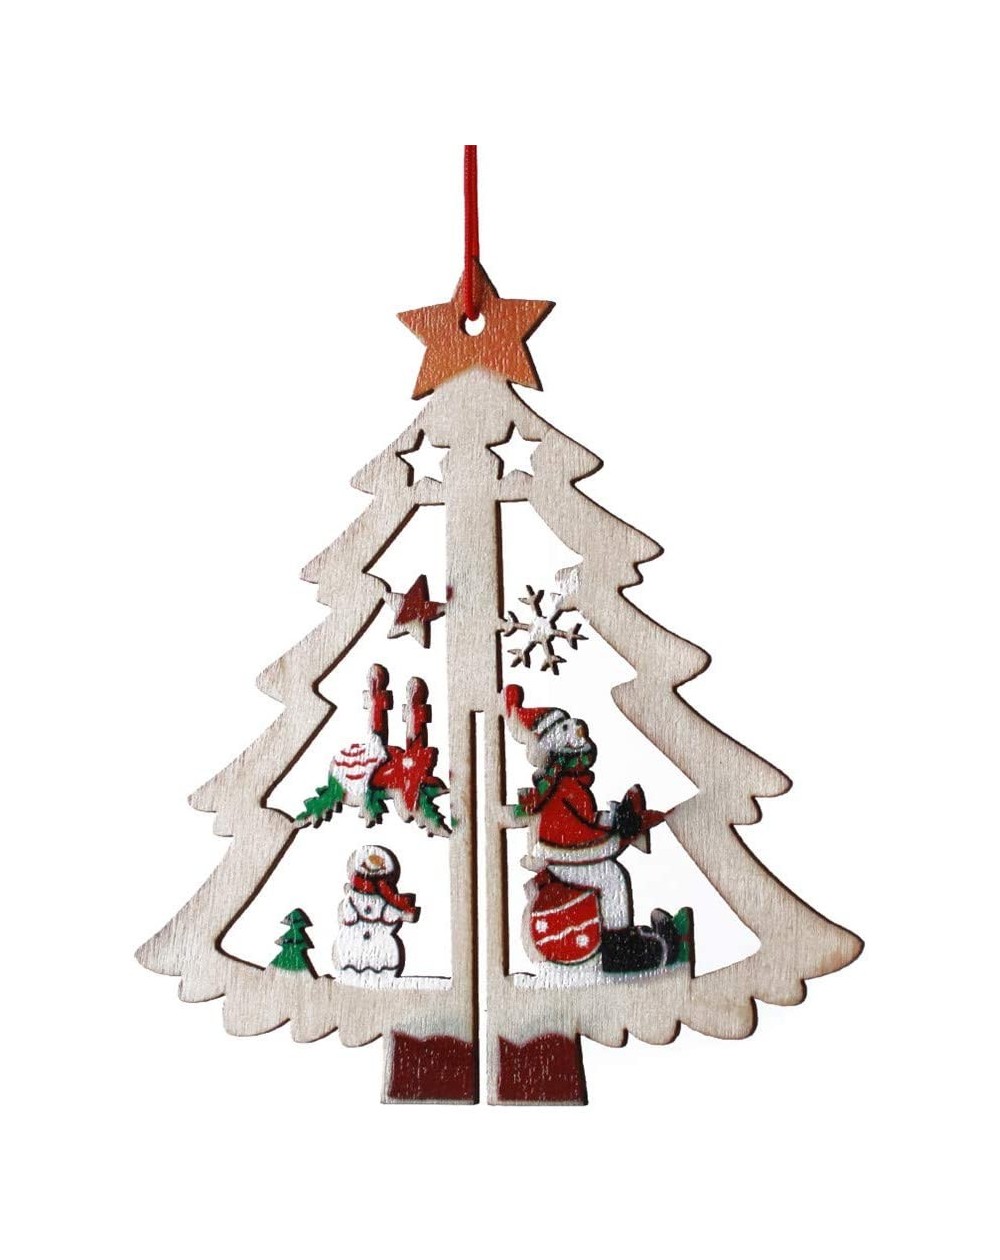 Ornaments Wooden Hollow Christmas Tree Hanging Ornaments Christmas Home Decorations(Style 3) - Style 3 - CD19GE7XLO5 $15.82